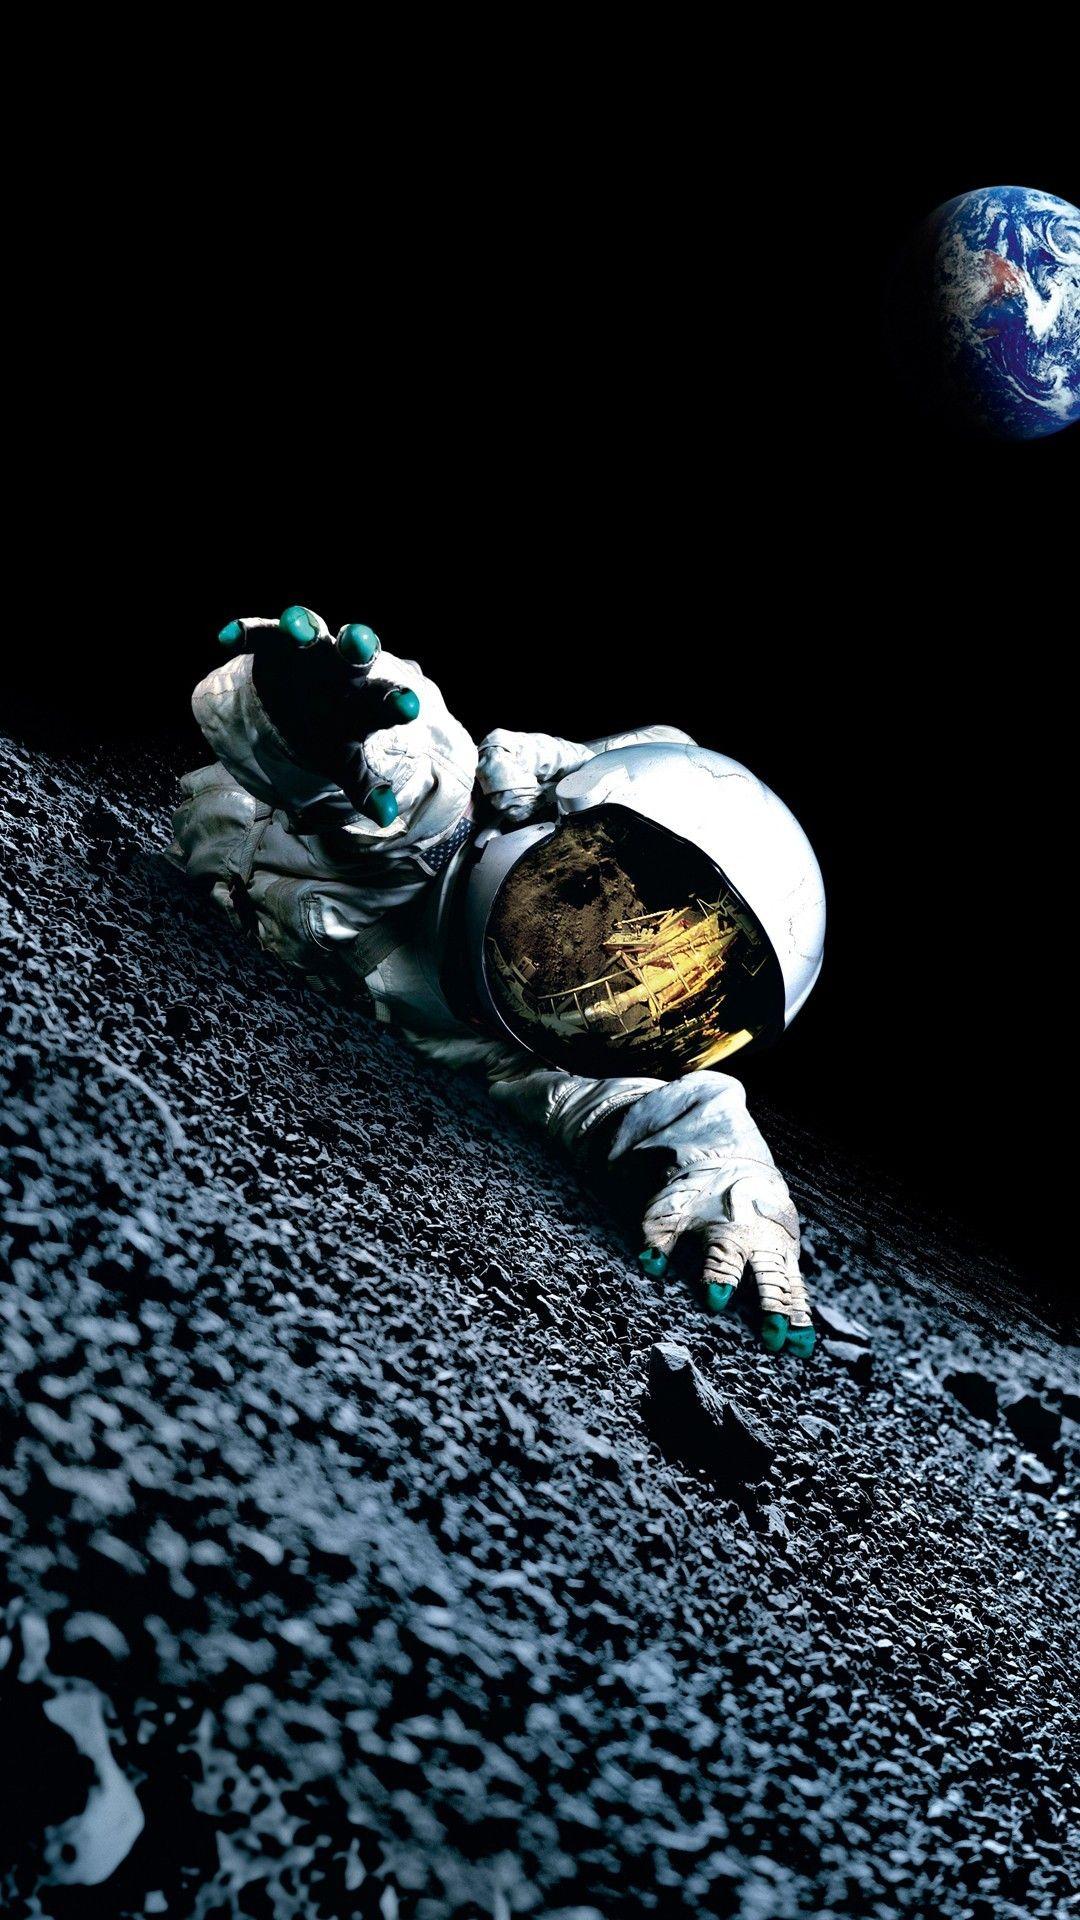 Apollo 18. HTC One wallpaper. iPhone wallpaper, Space background